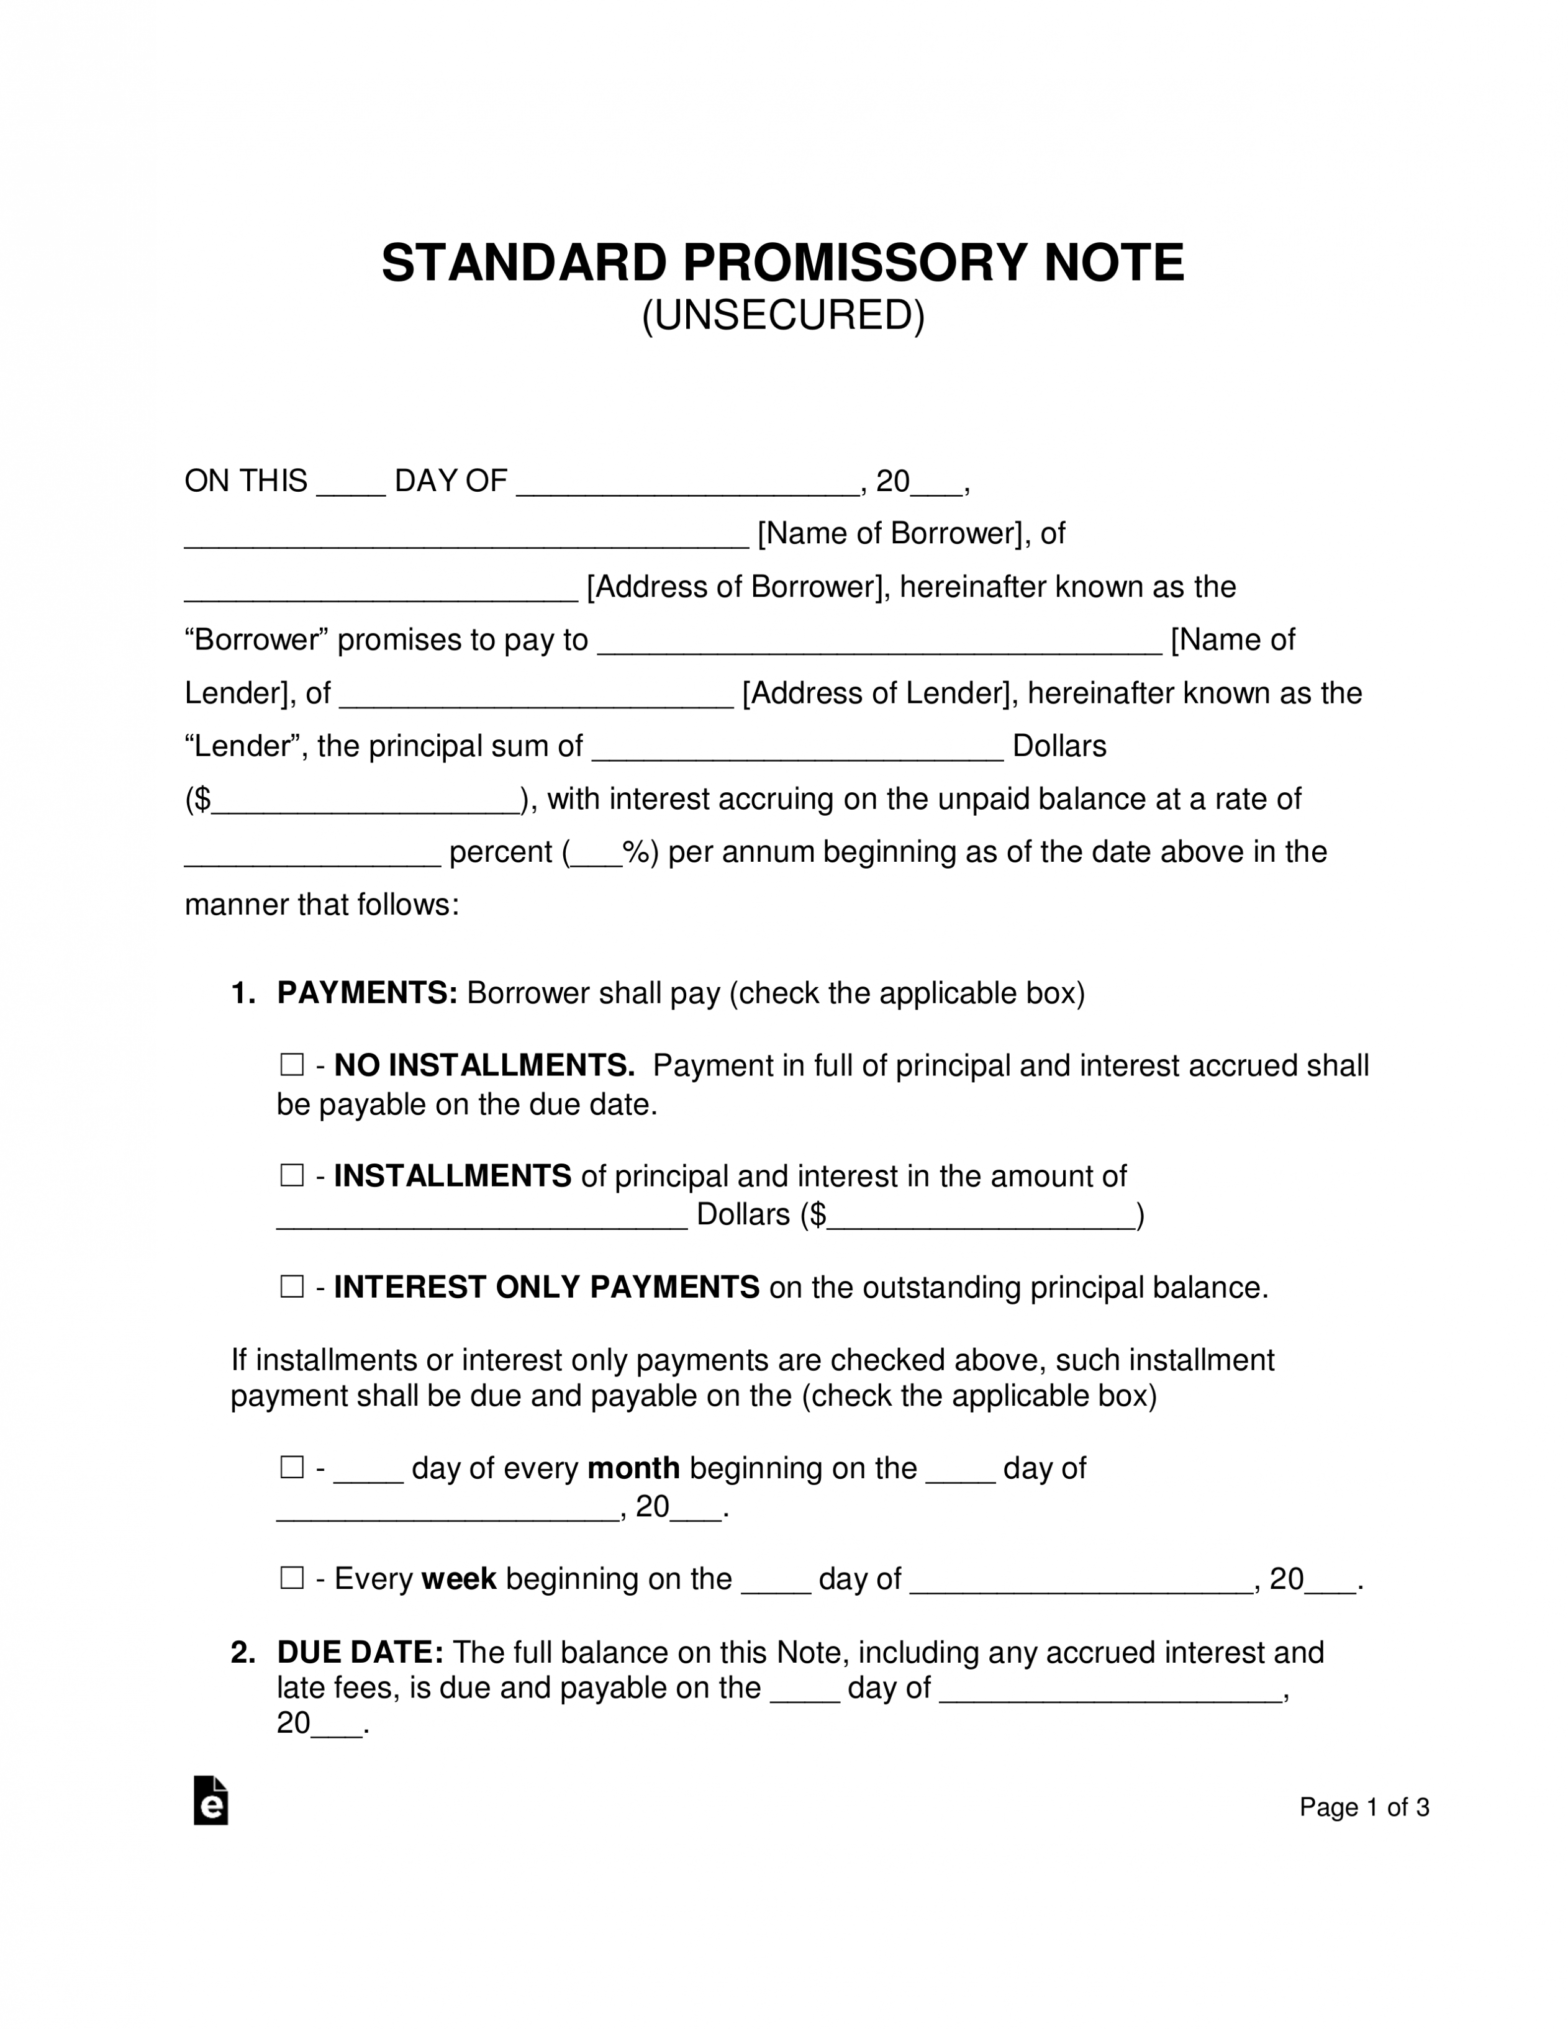 Free Unsecured Promissory Note Template - Word | Pdf | Eforms for Unsecured Promissory Note Template